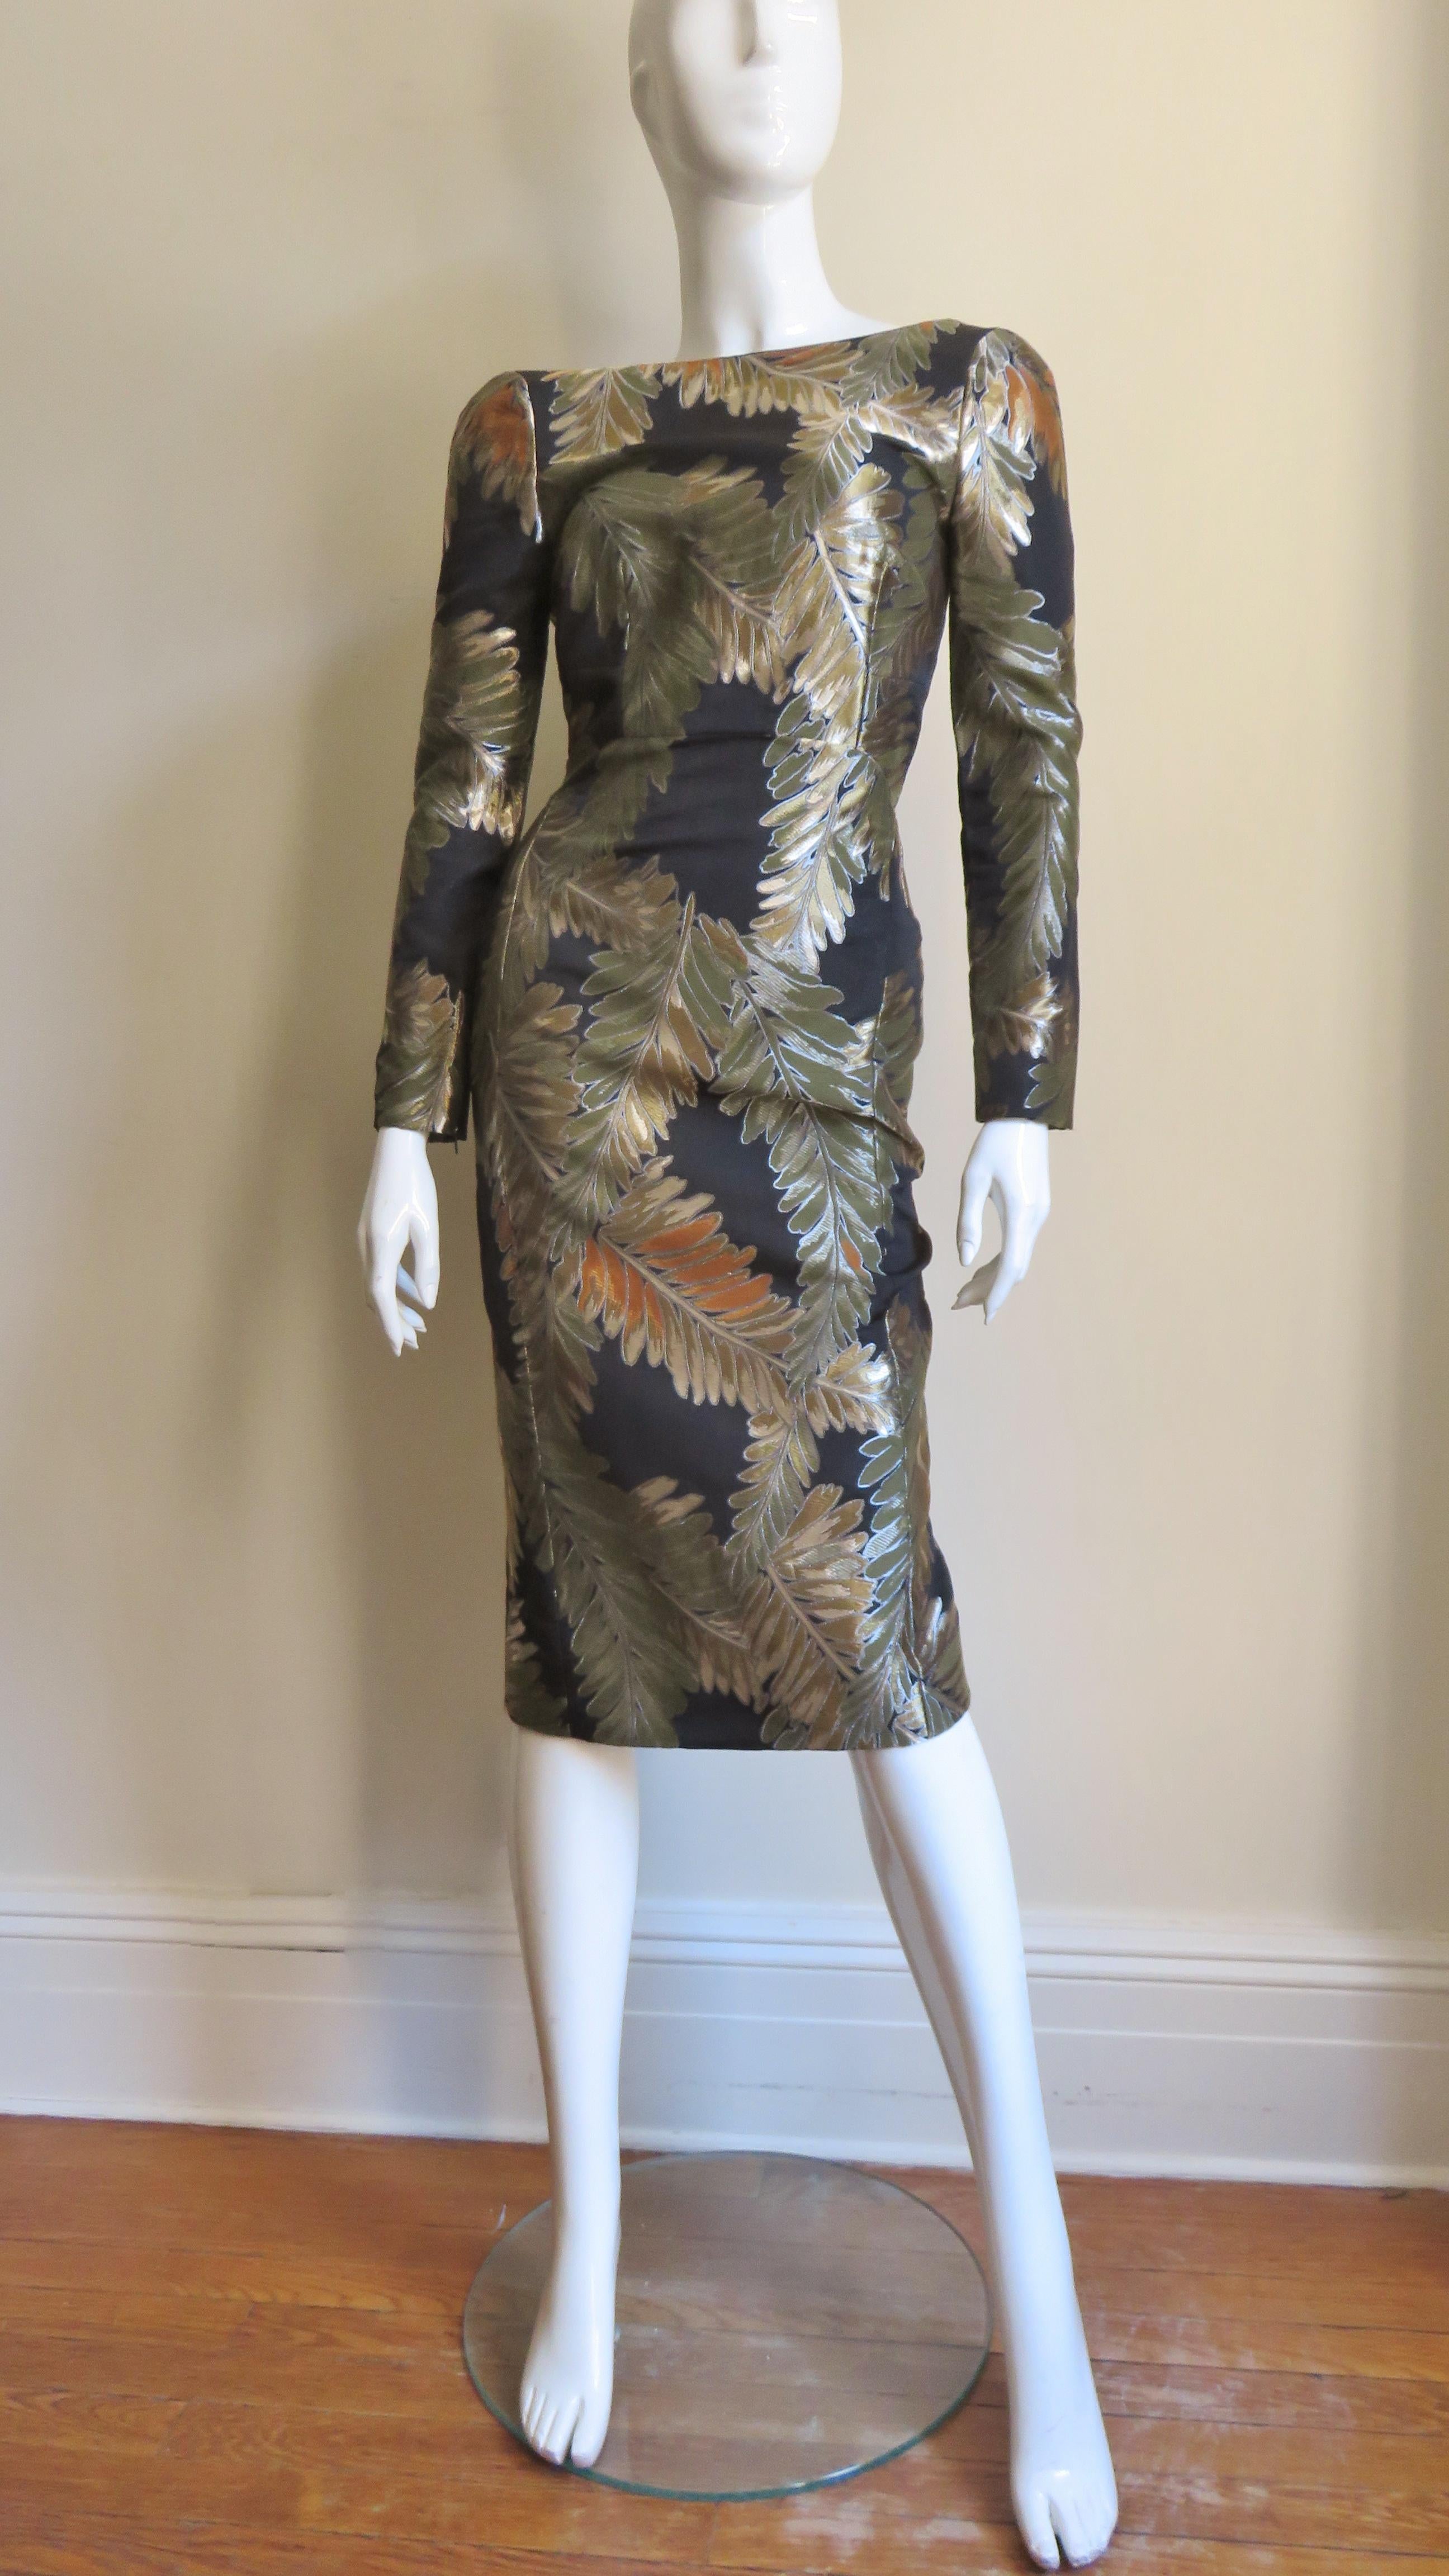 Gucci Silk Brocade Open Back Dress In Excellent Condition For Sale In Water Mill, NY